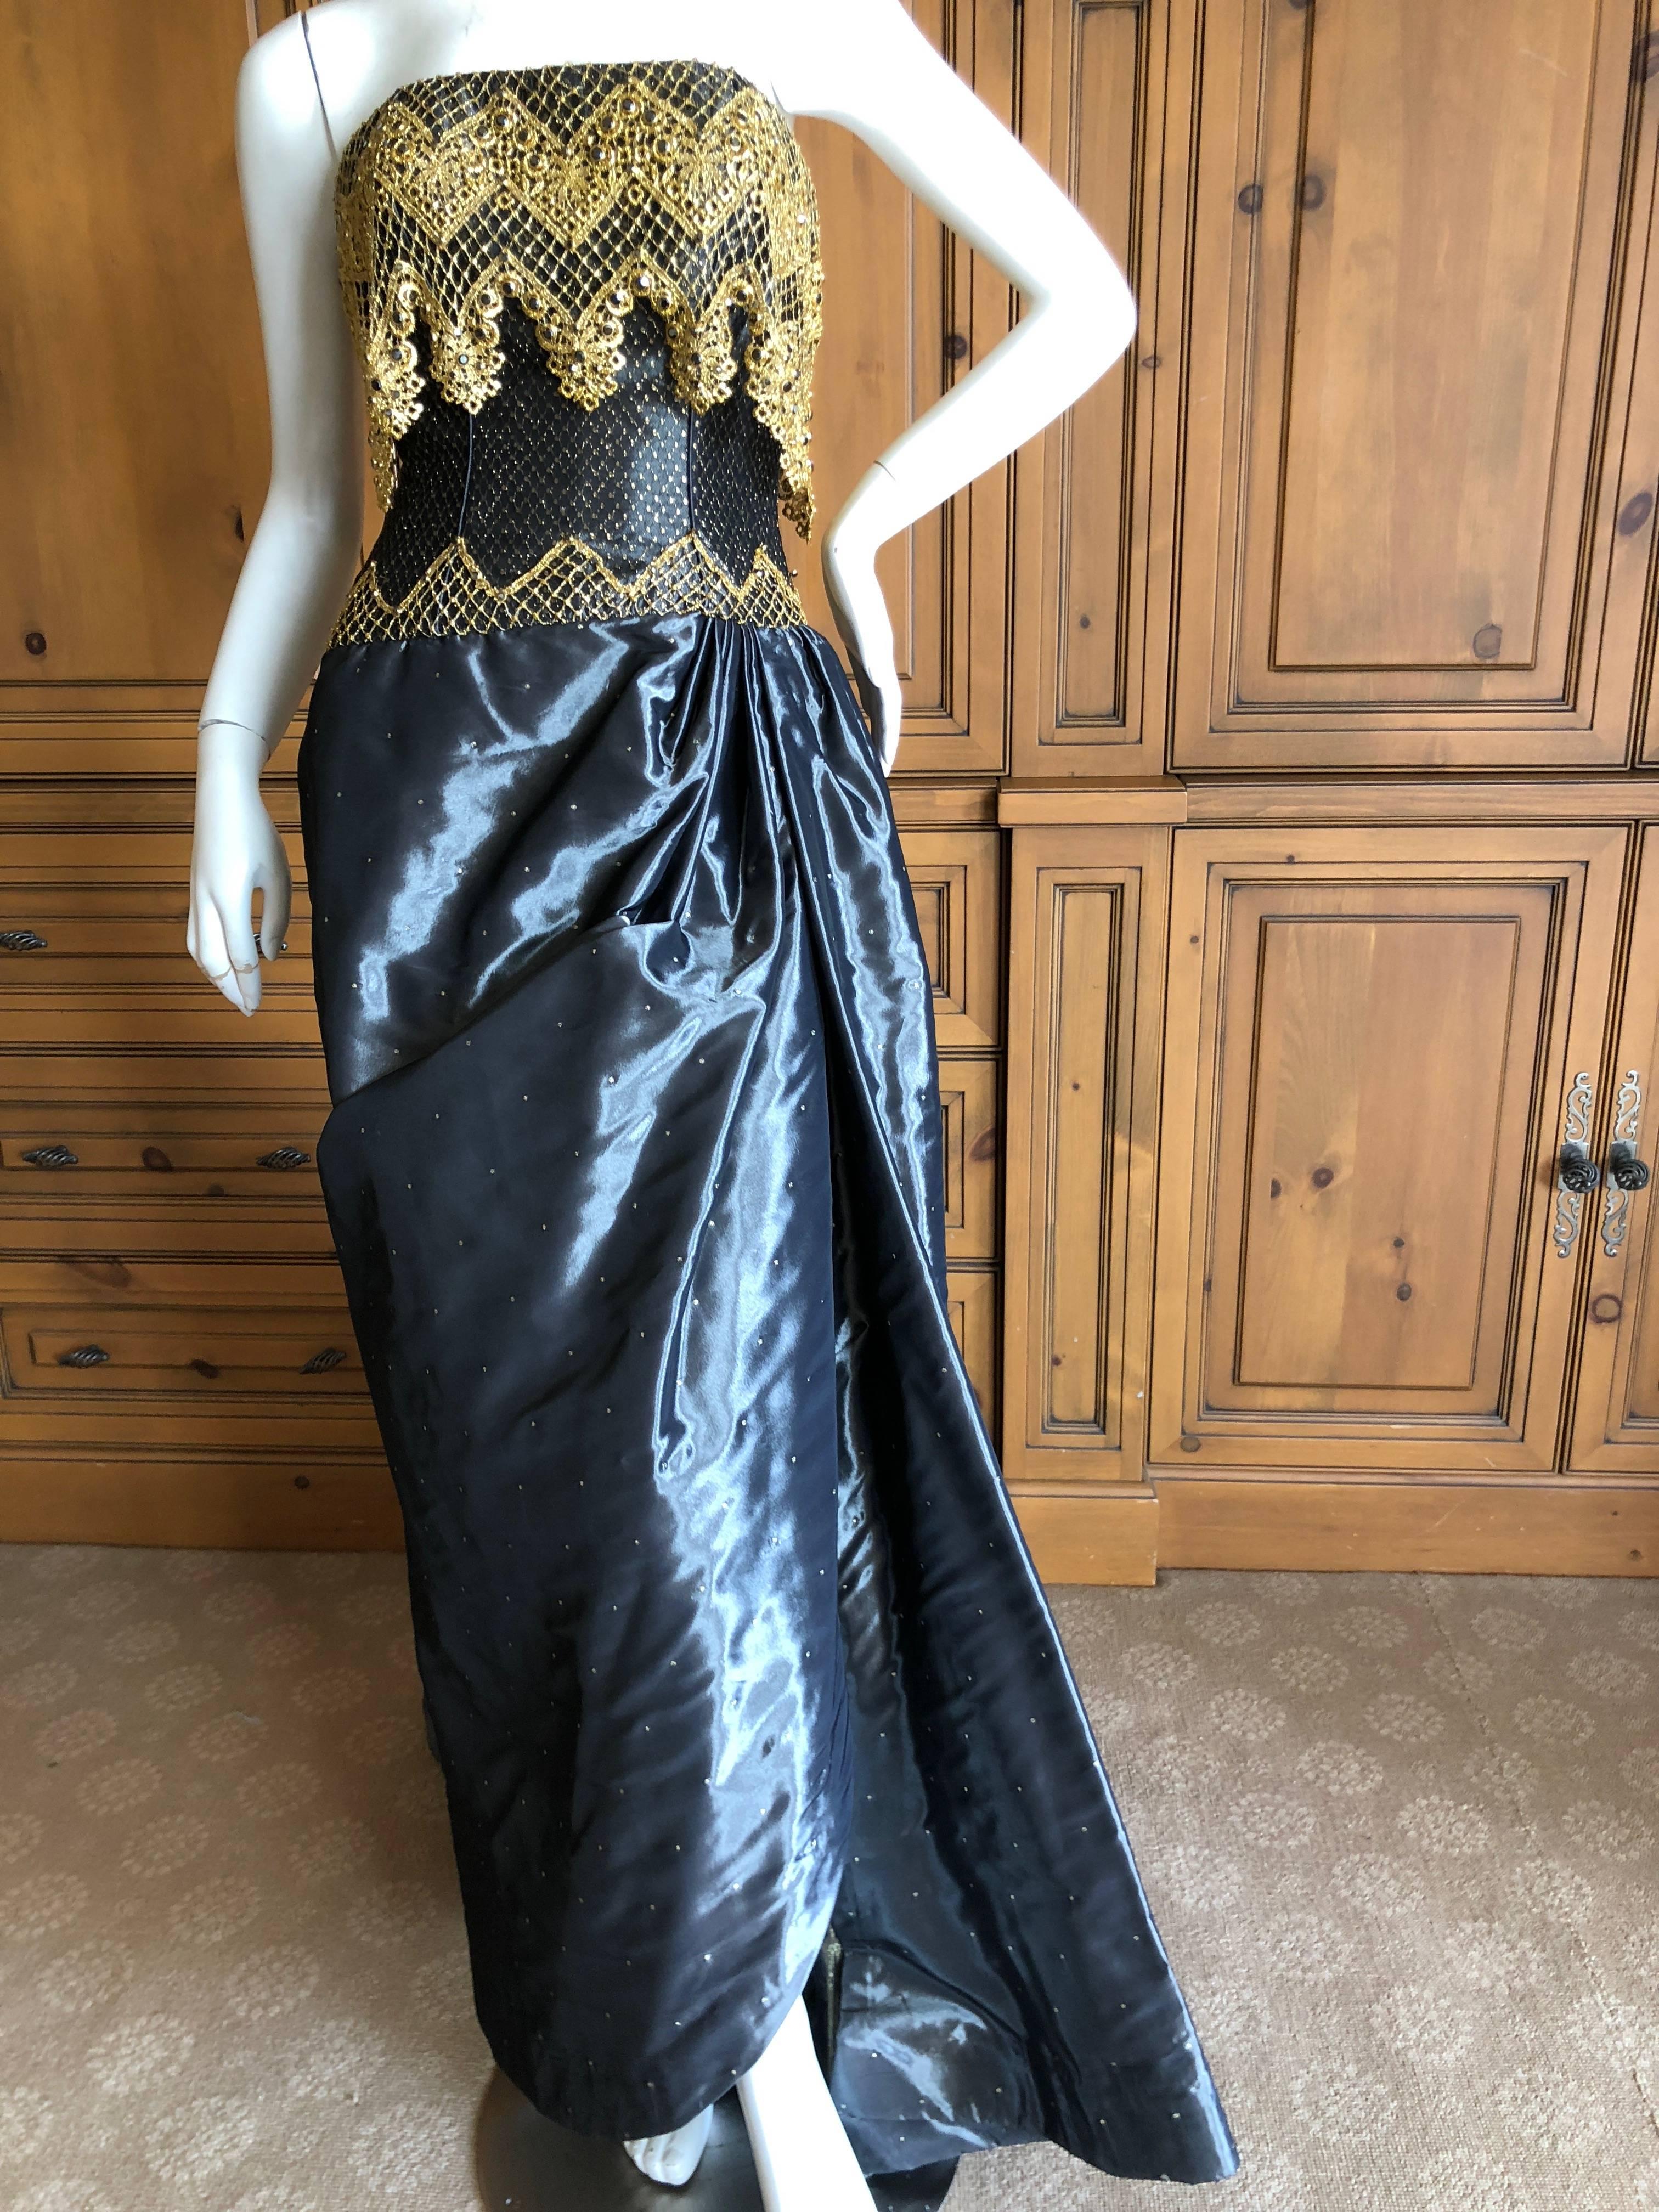 Bob Mackie 1980's Silk Strapless Evening Dress and Cape Coat from Neiman Marcus
Incredible bezel set crystal embellished gold lace on a strapless evening dress with matching cape coat There is a full inner corset bra.
Size 4
Bust 34